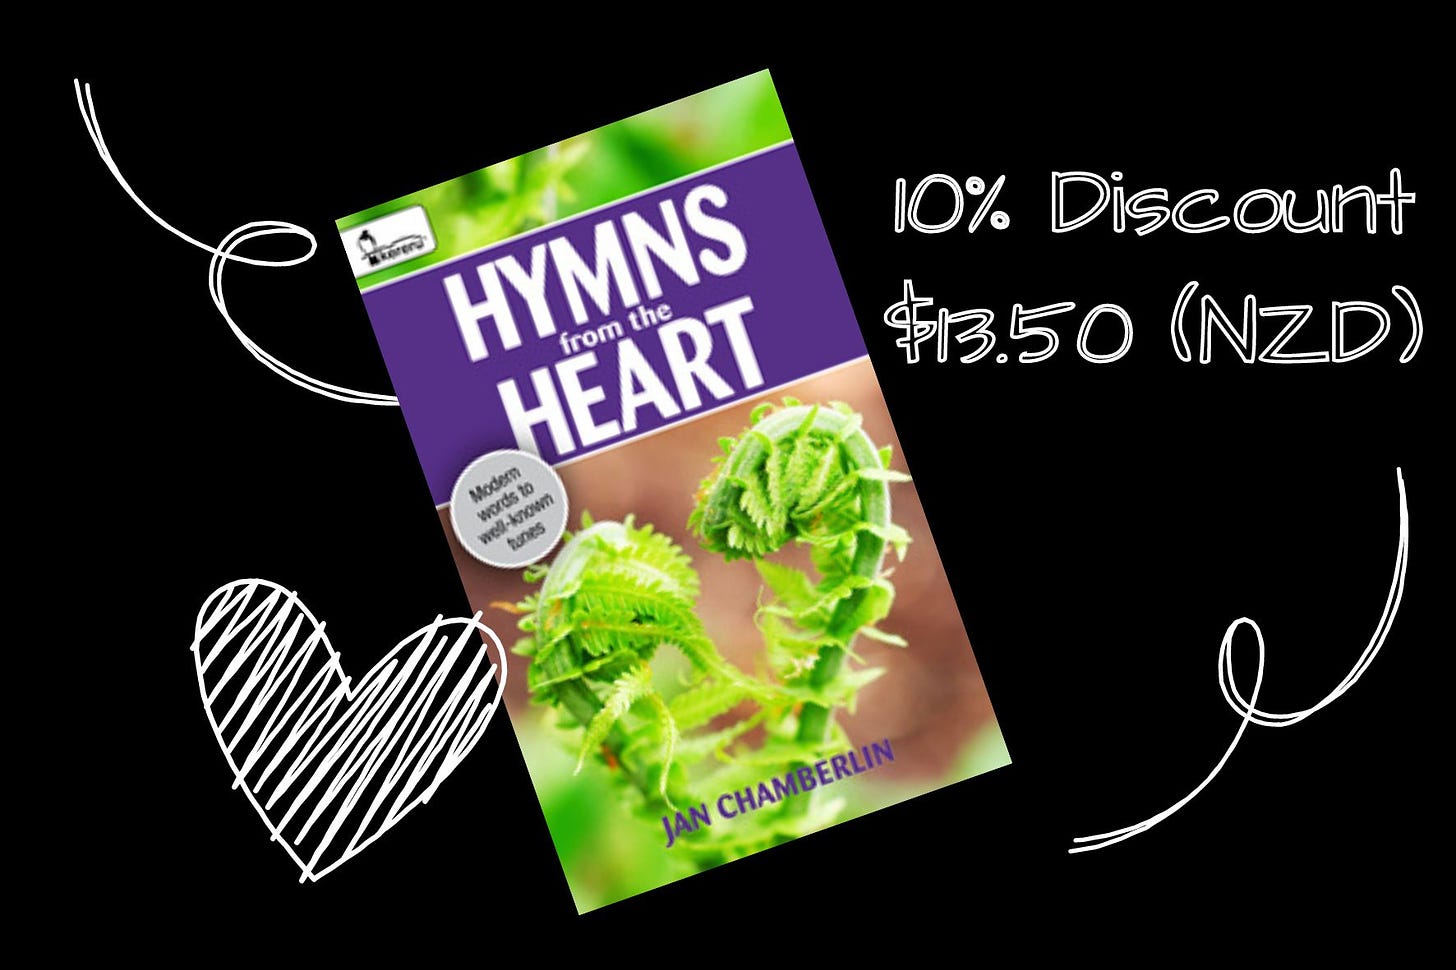 Hymns from the Heart special offer 10% discount